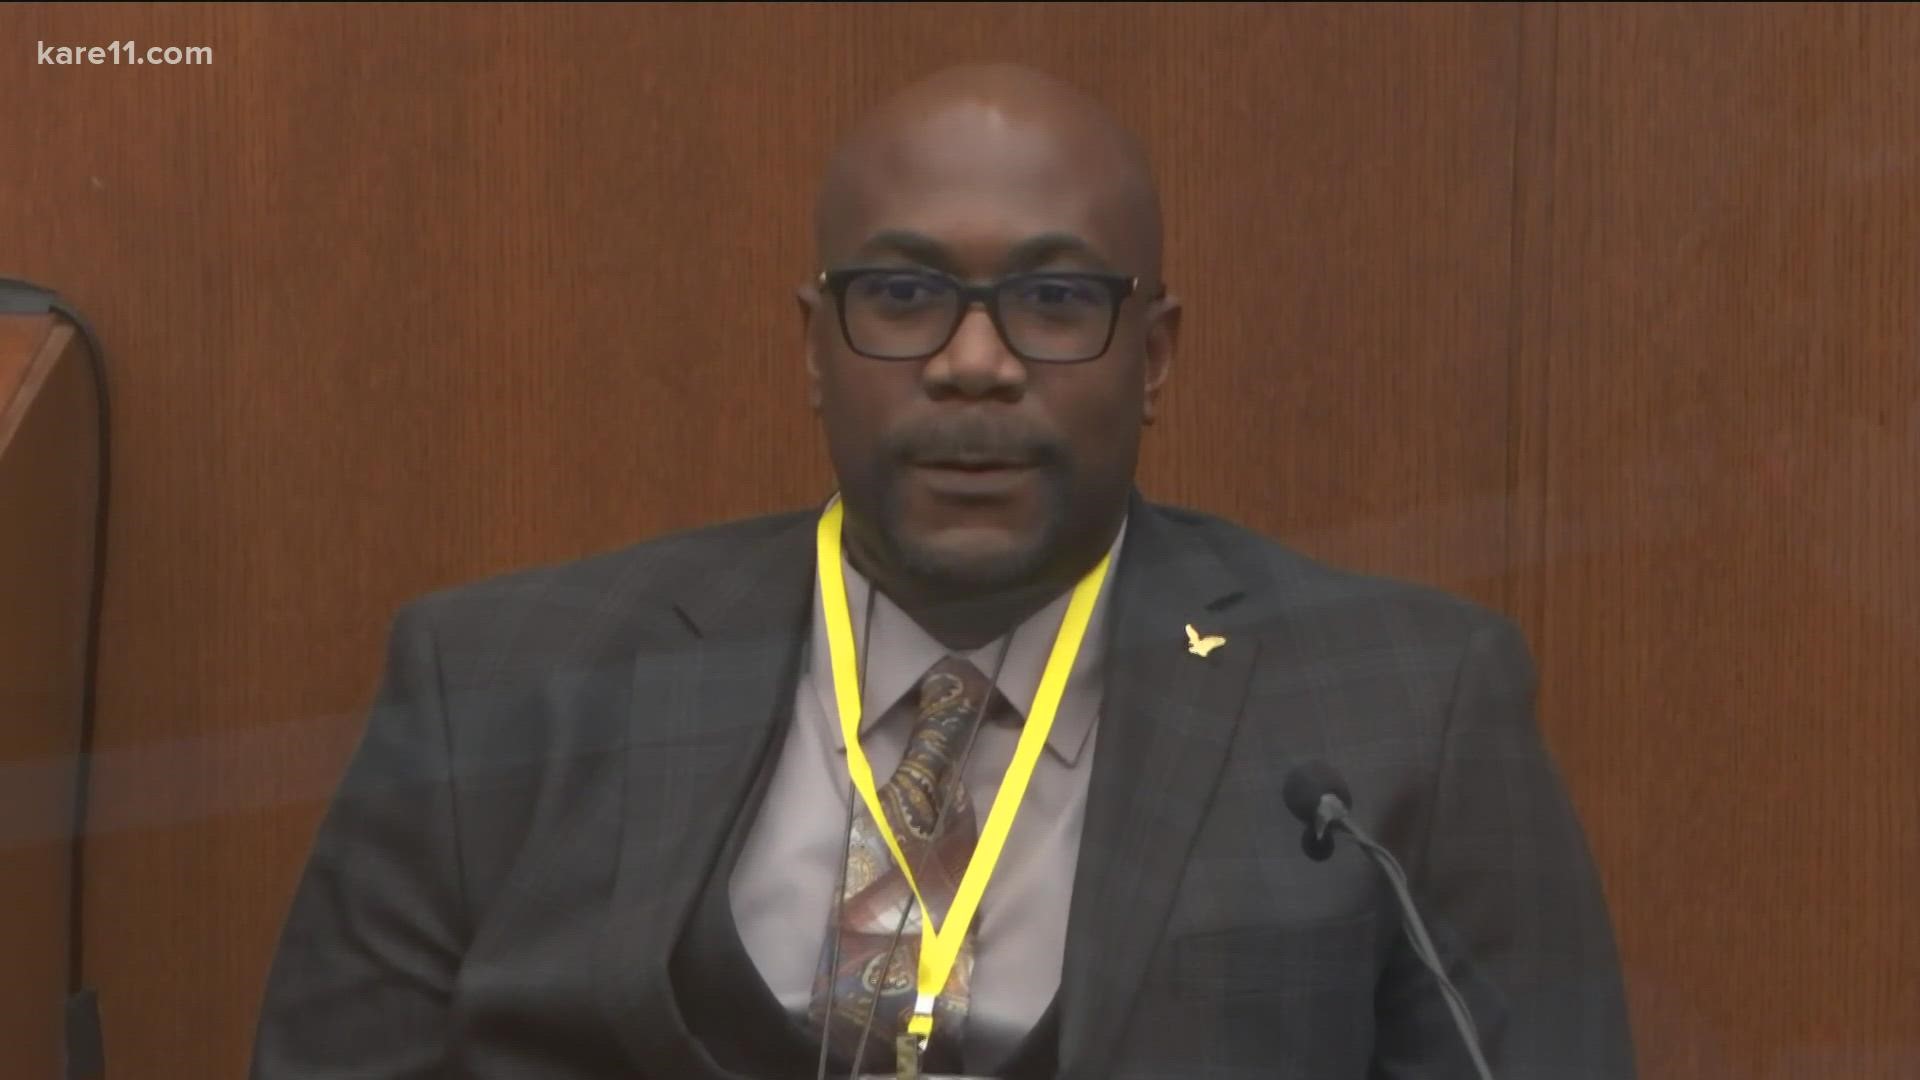 Philonise Floyd, George Floyd's brother, was called to the stand by the state as a "spark of life" witness in the trial of former Minneapolis officer Derek Chauvin.